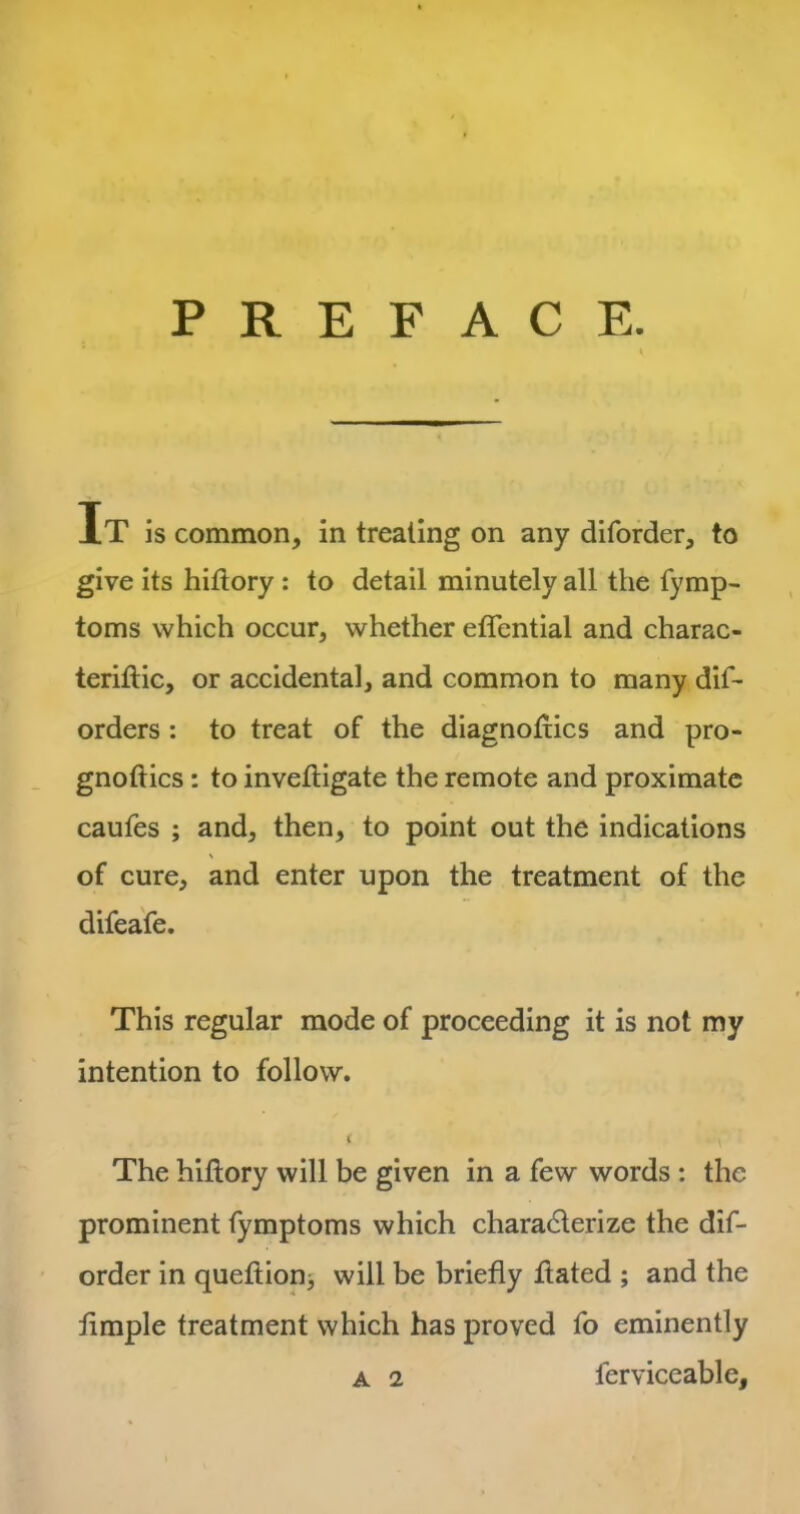 PREFACE. It is common, in treating on any diforder, to give its hiftory : to detail minutely all the fymp- toms which occur, whether effential and charac- teriftic, or accidental, and common to many dis- orders : to treat of the diagnostics and pro- gnostics : to invefligate the remote and proximate caufes ; and, then, to point out the indications \ of cure, and enter upon the treatment of the difeafe. This regular mode of proceeding it is not my intention to follow. < The history will be given in a few words : the prominent Symptoms which characterize the dis- order in queftion> will be briefly flated ; and the fimple treatment which has proved So eminently a 2 Serviceable,